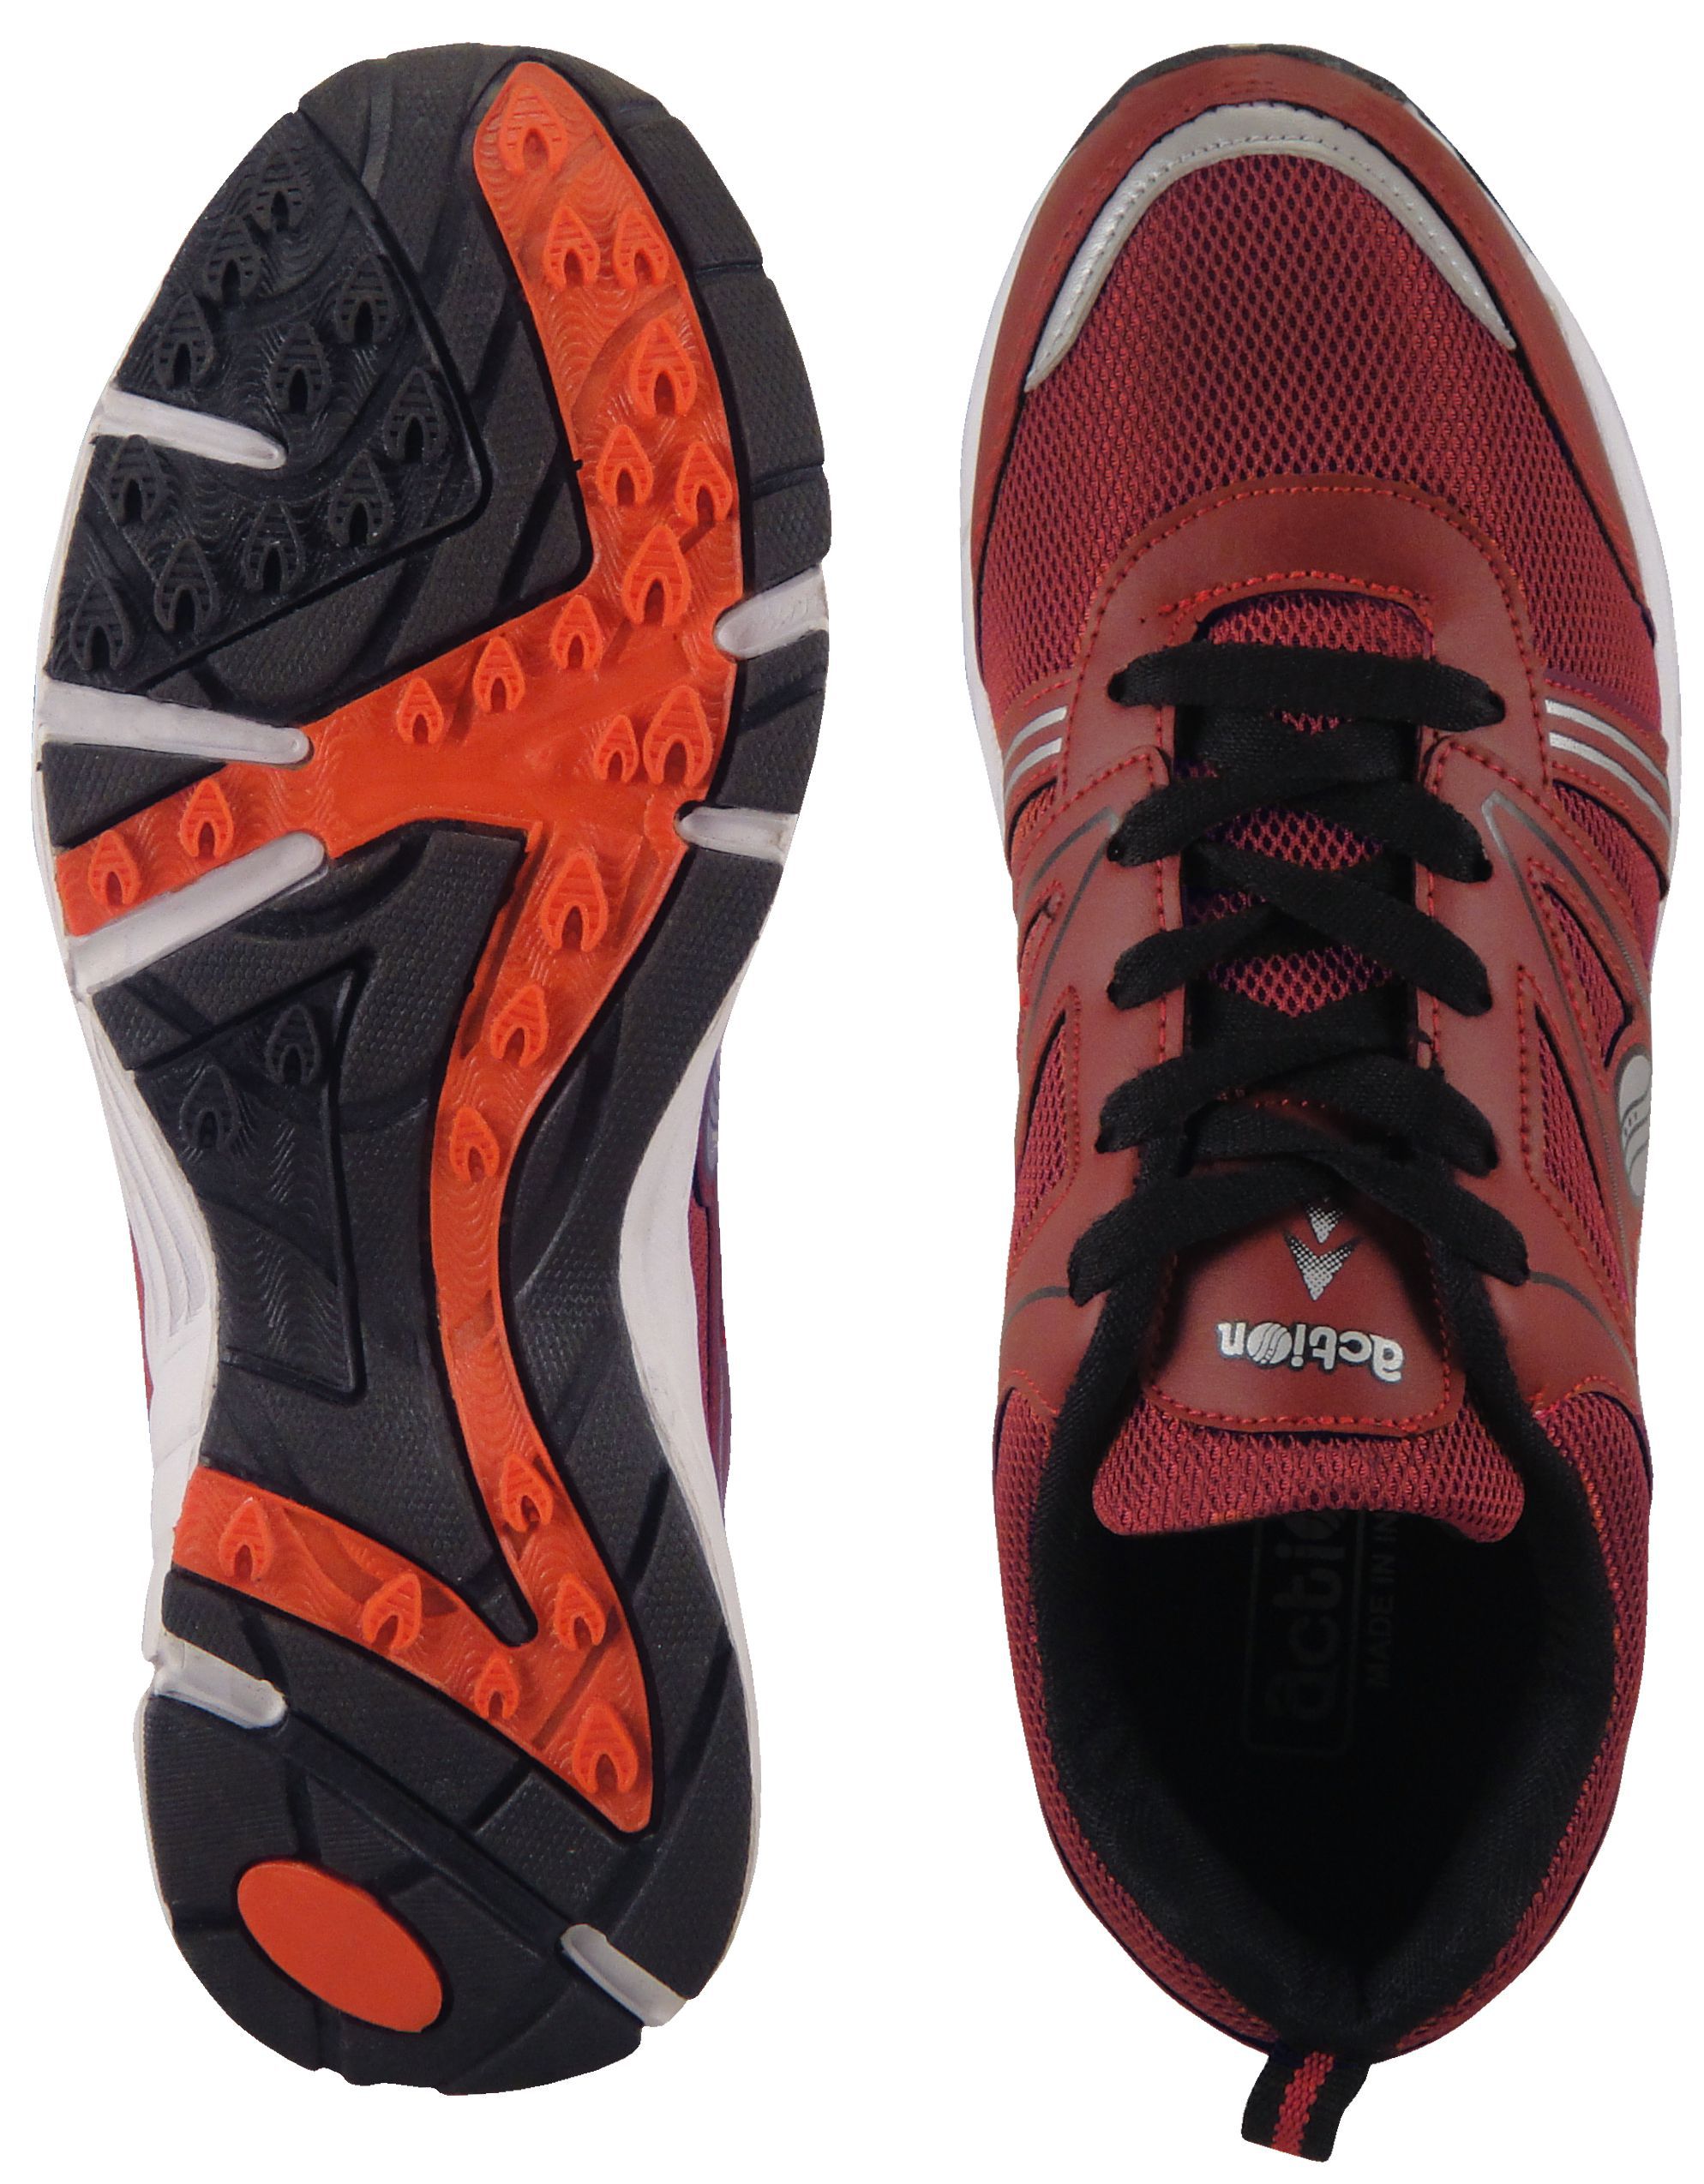 Action Synergy Maroon Running Shoes - Buy Action Synergy Maroon Running ...